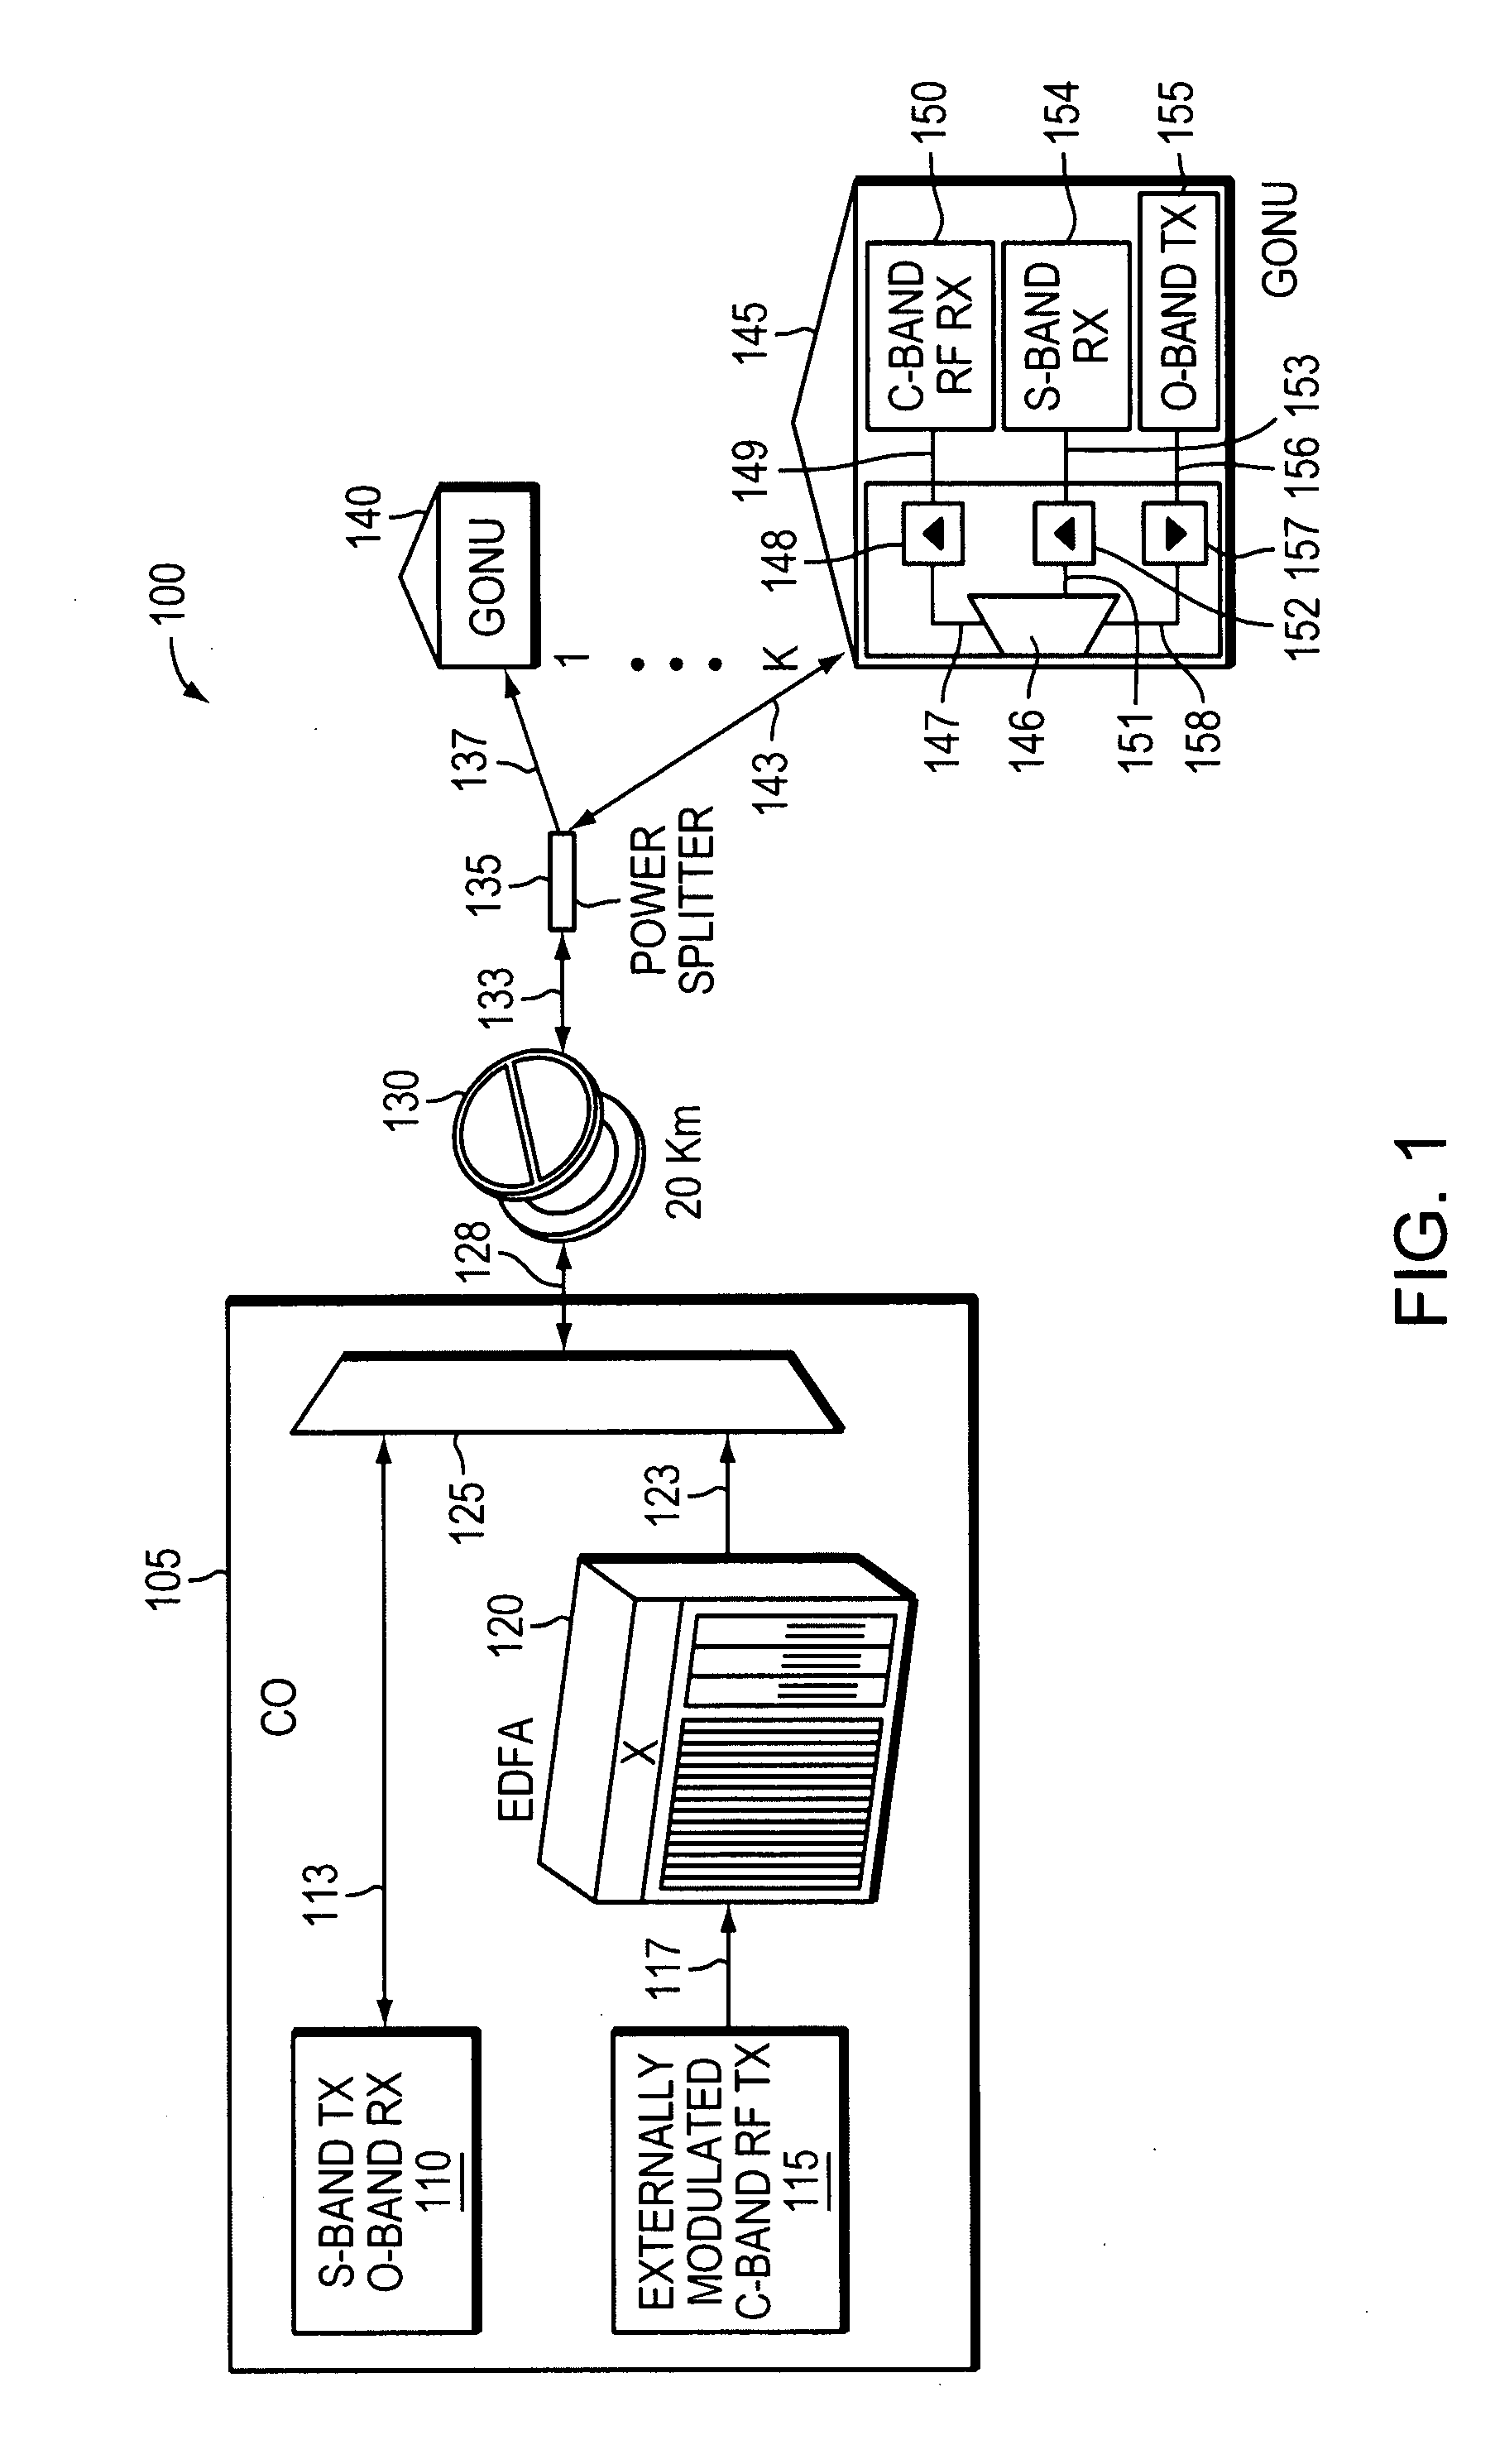 Methods and apparatus for upgrading passive optical networks